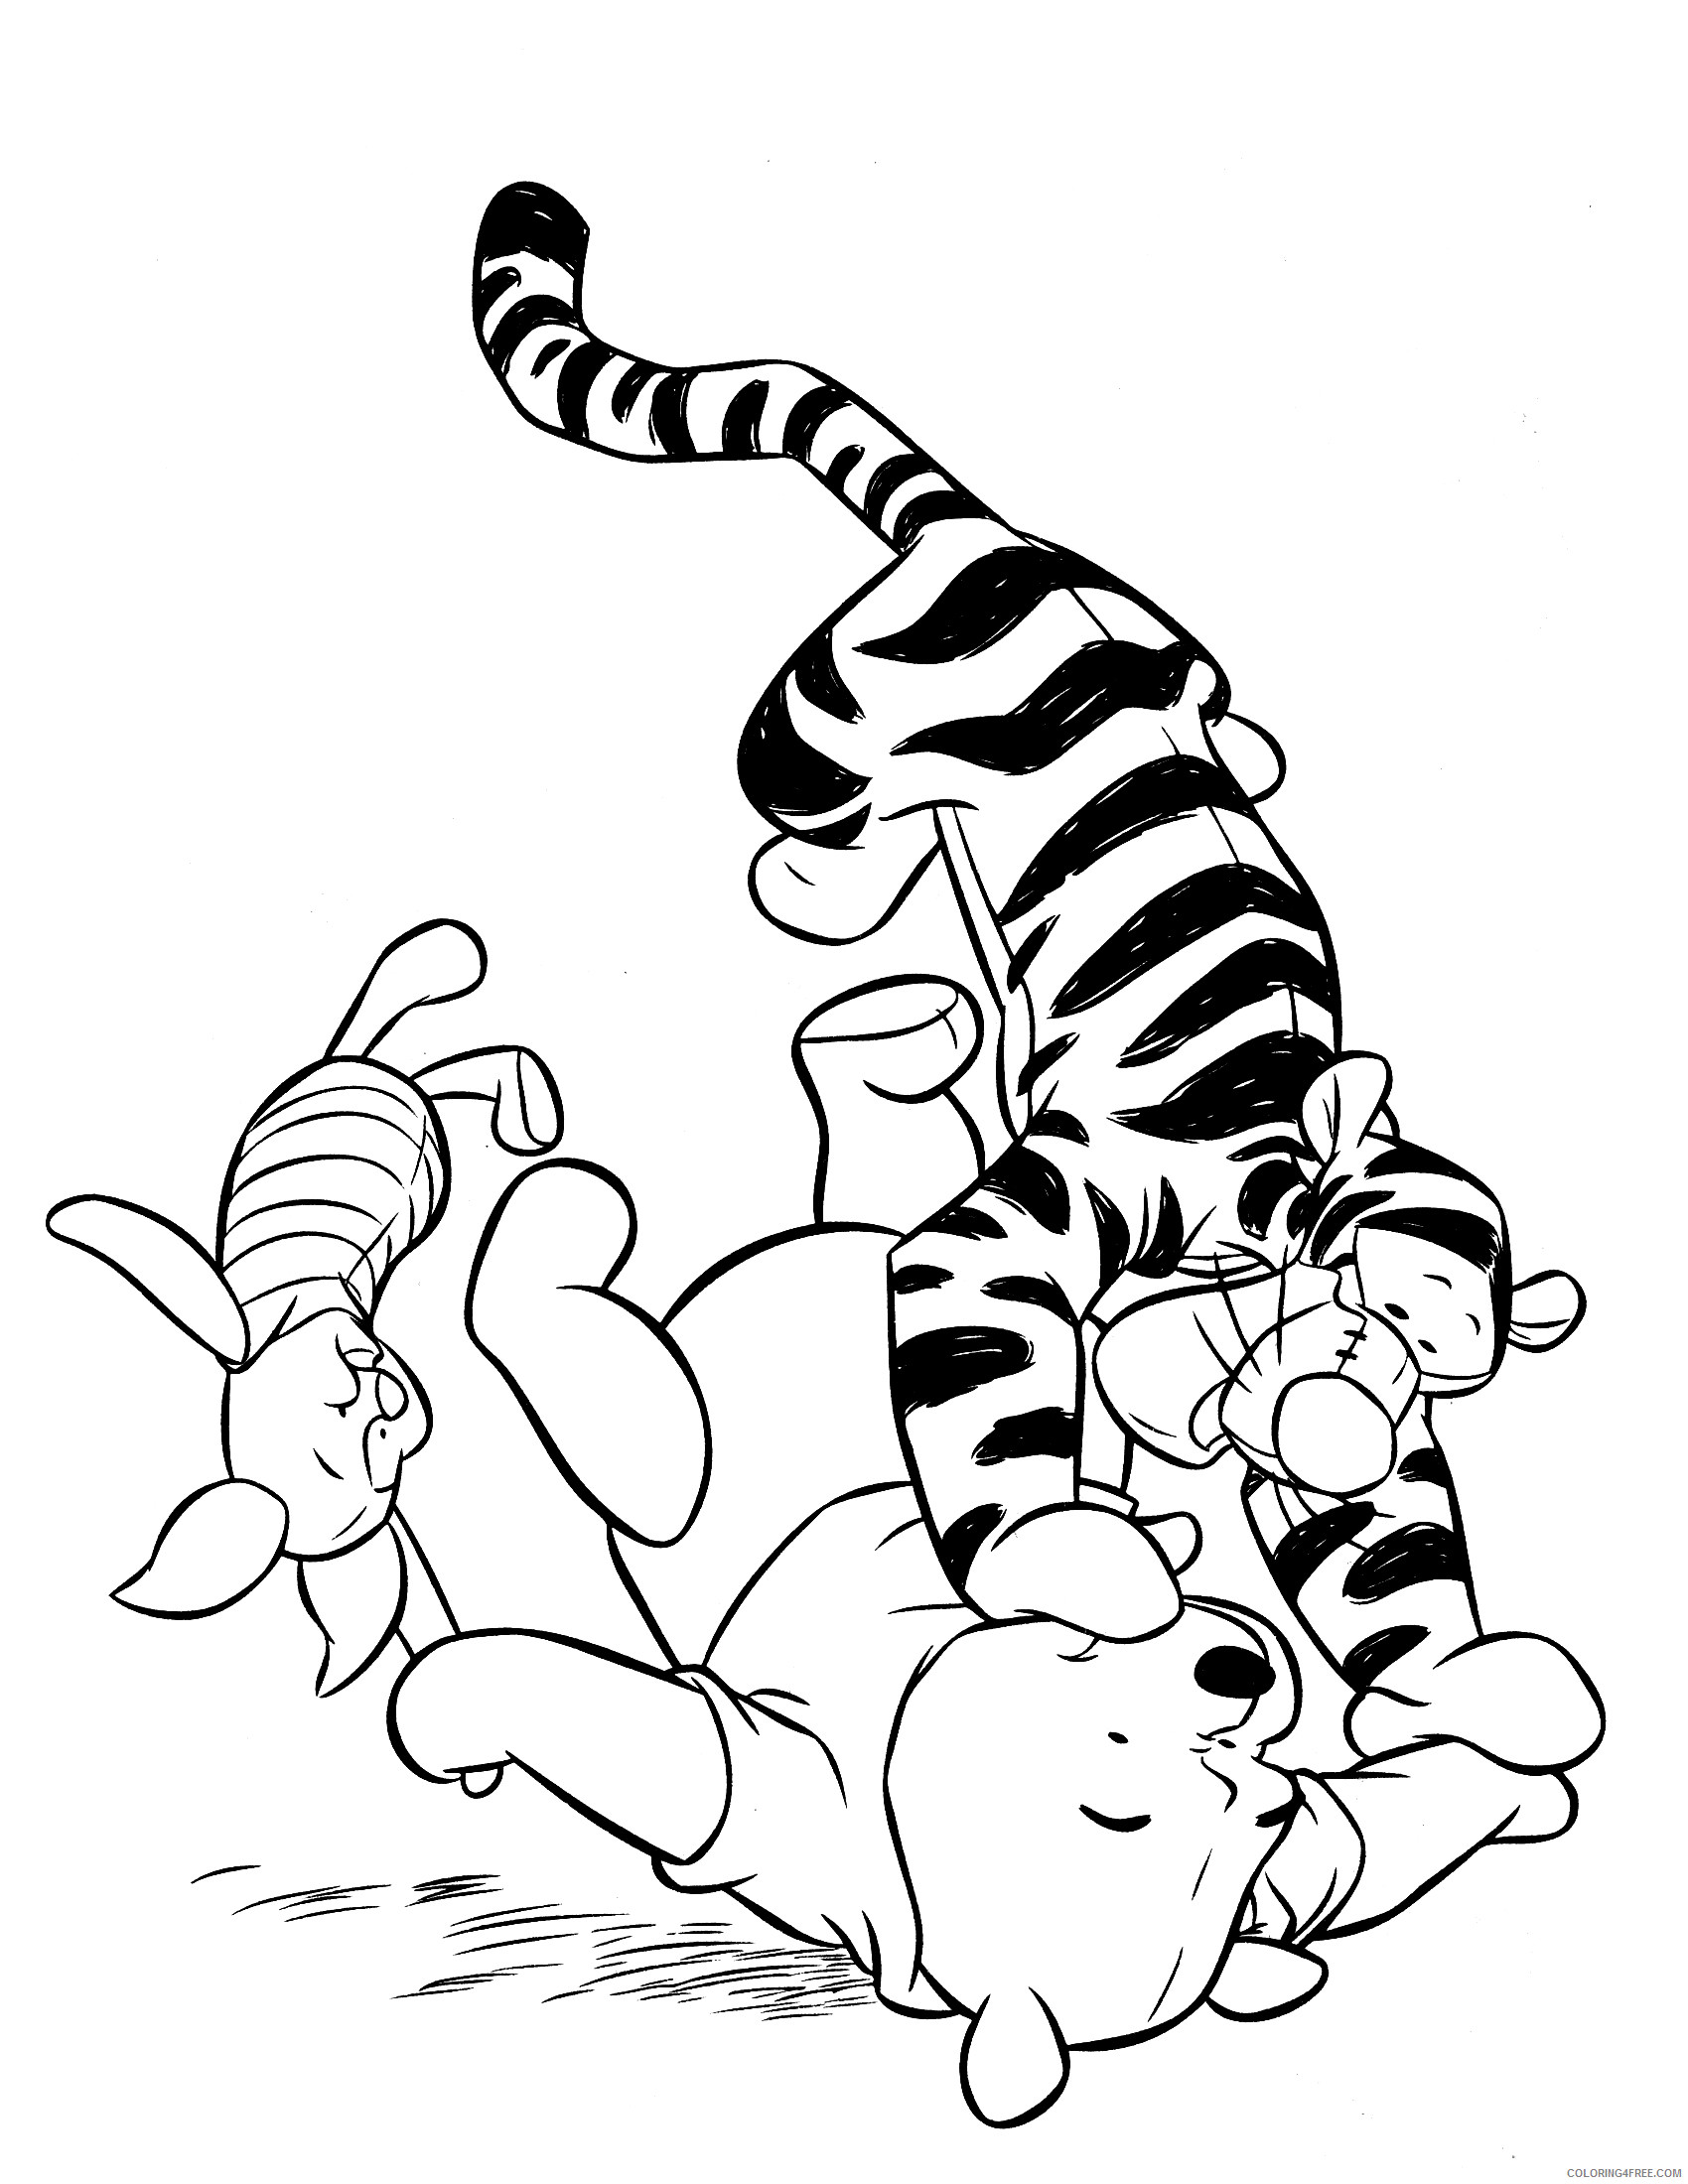 Winnie the Pooh Coloring Pages Cartoons Winnie The Pooh and Friends Printable 2020 7059 Coloring4free